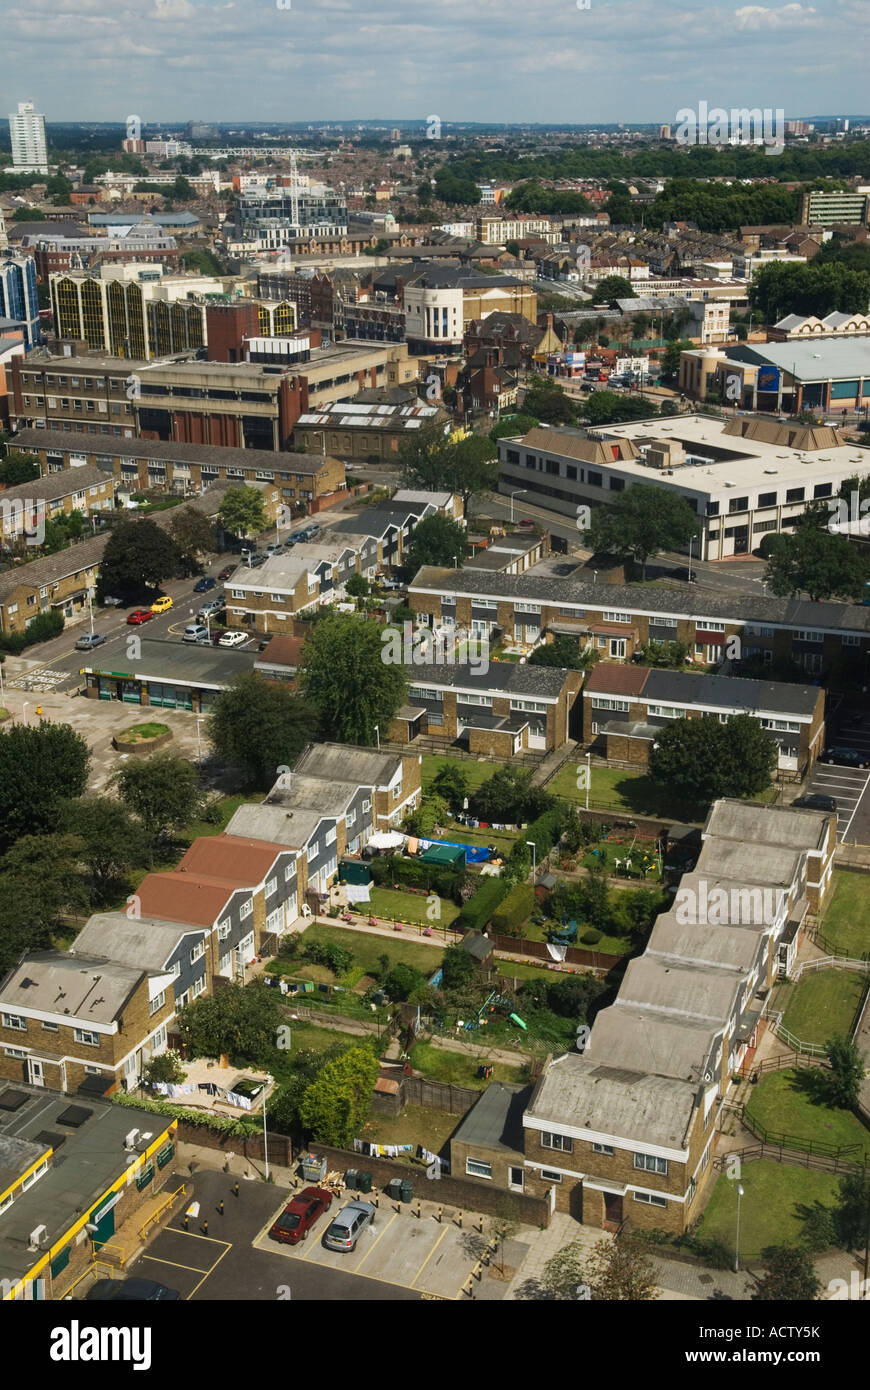 Arial view of Stratford East London looking down onto housing gardens   2007 2000s HOMER SYKES Stock Photo